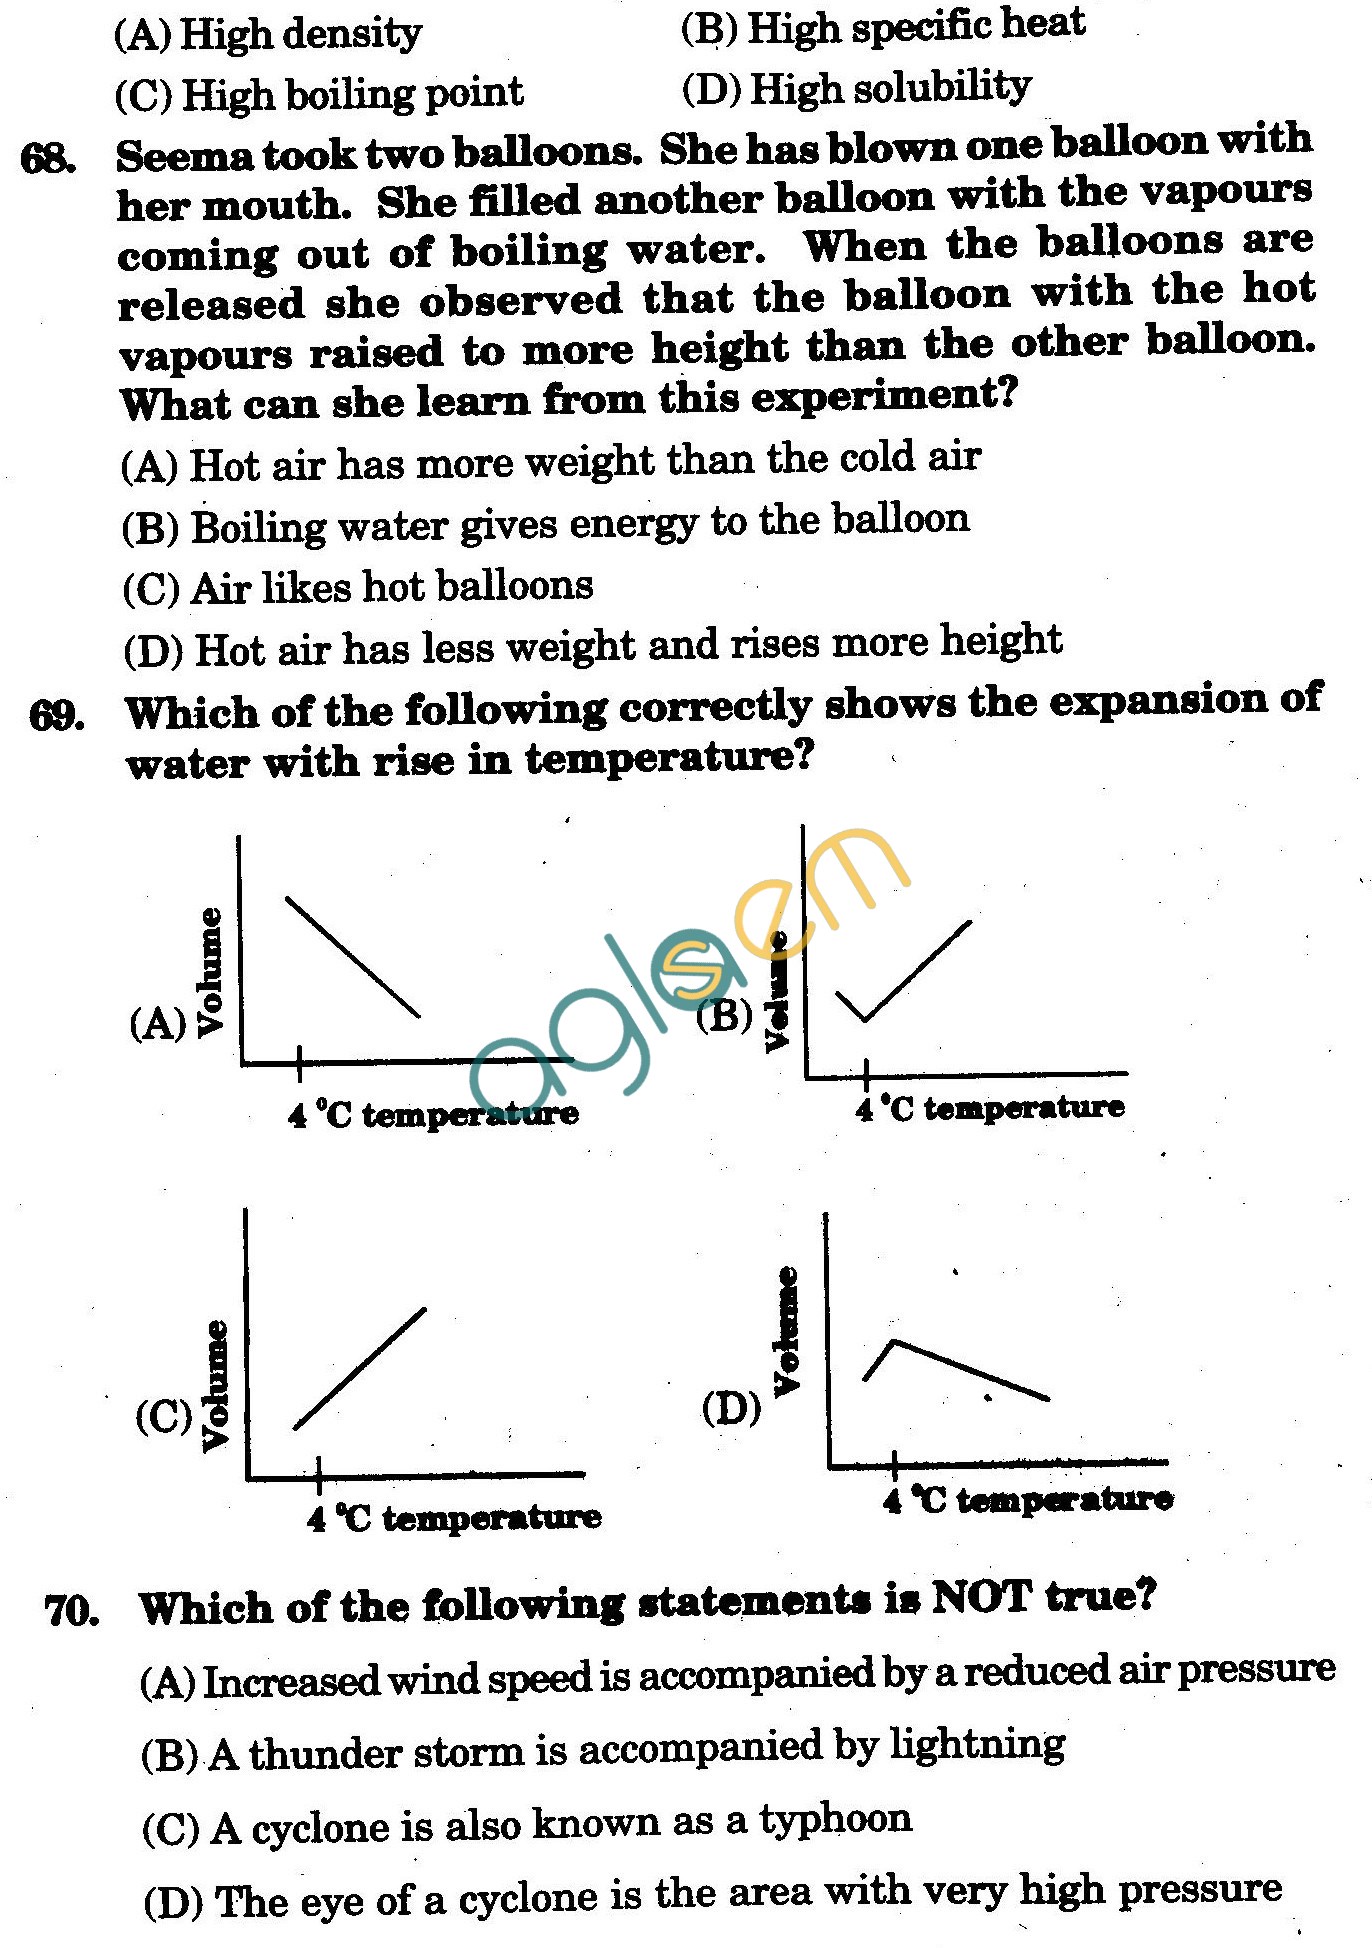 NSTSE 2009 Class VII Question Paper with Answers - Chemistry